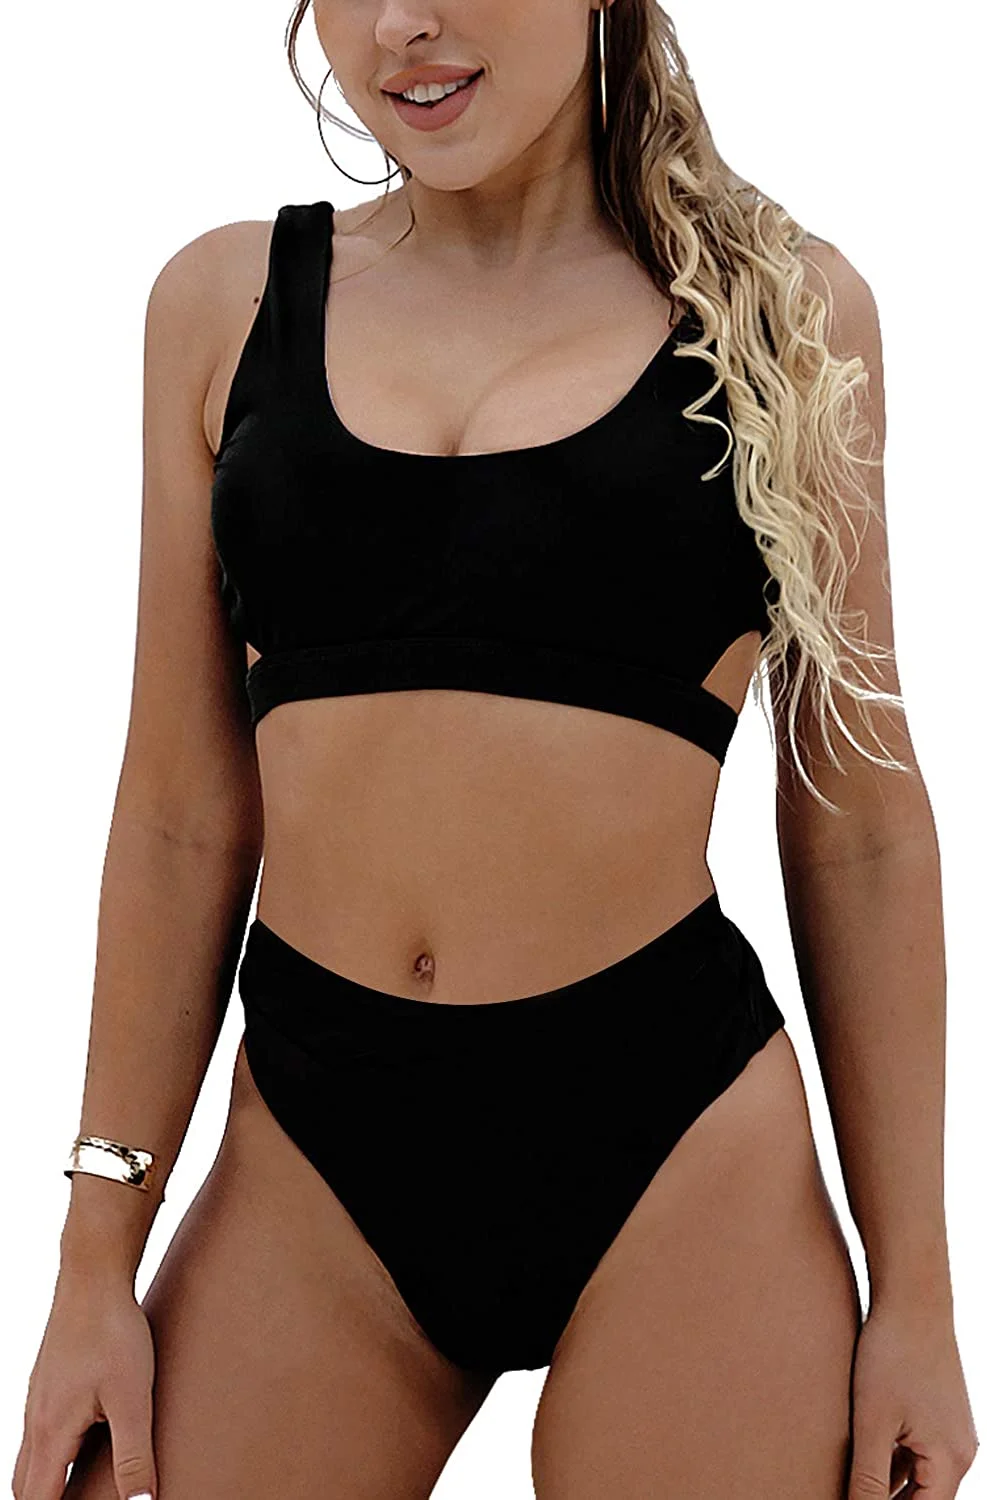 Women's High Waisted Swimsuit Crop Top Cut Out Two Piece Cheeky High Rise Bathing Suit Bikini